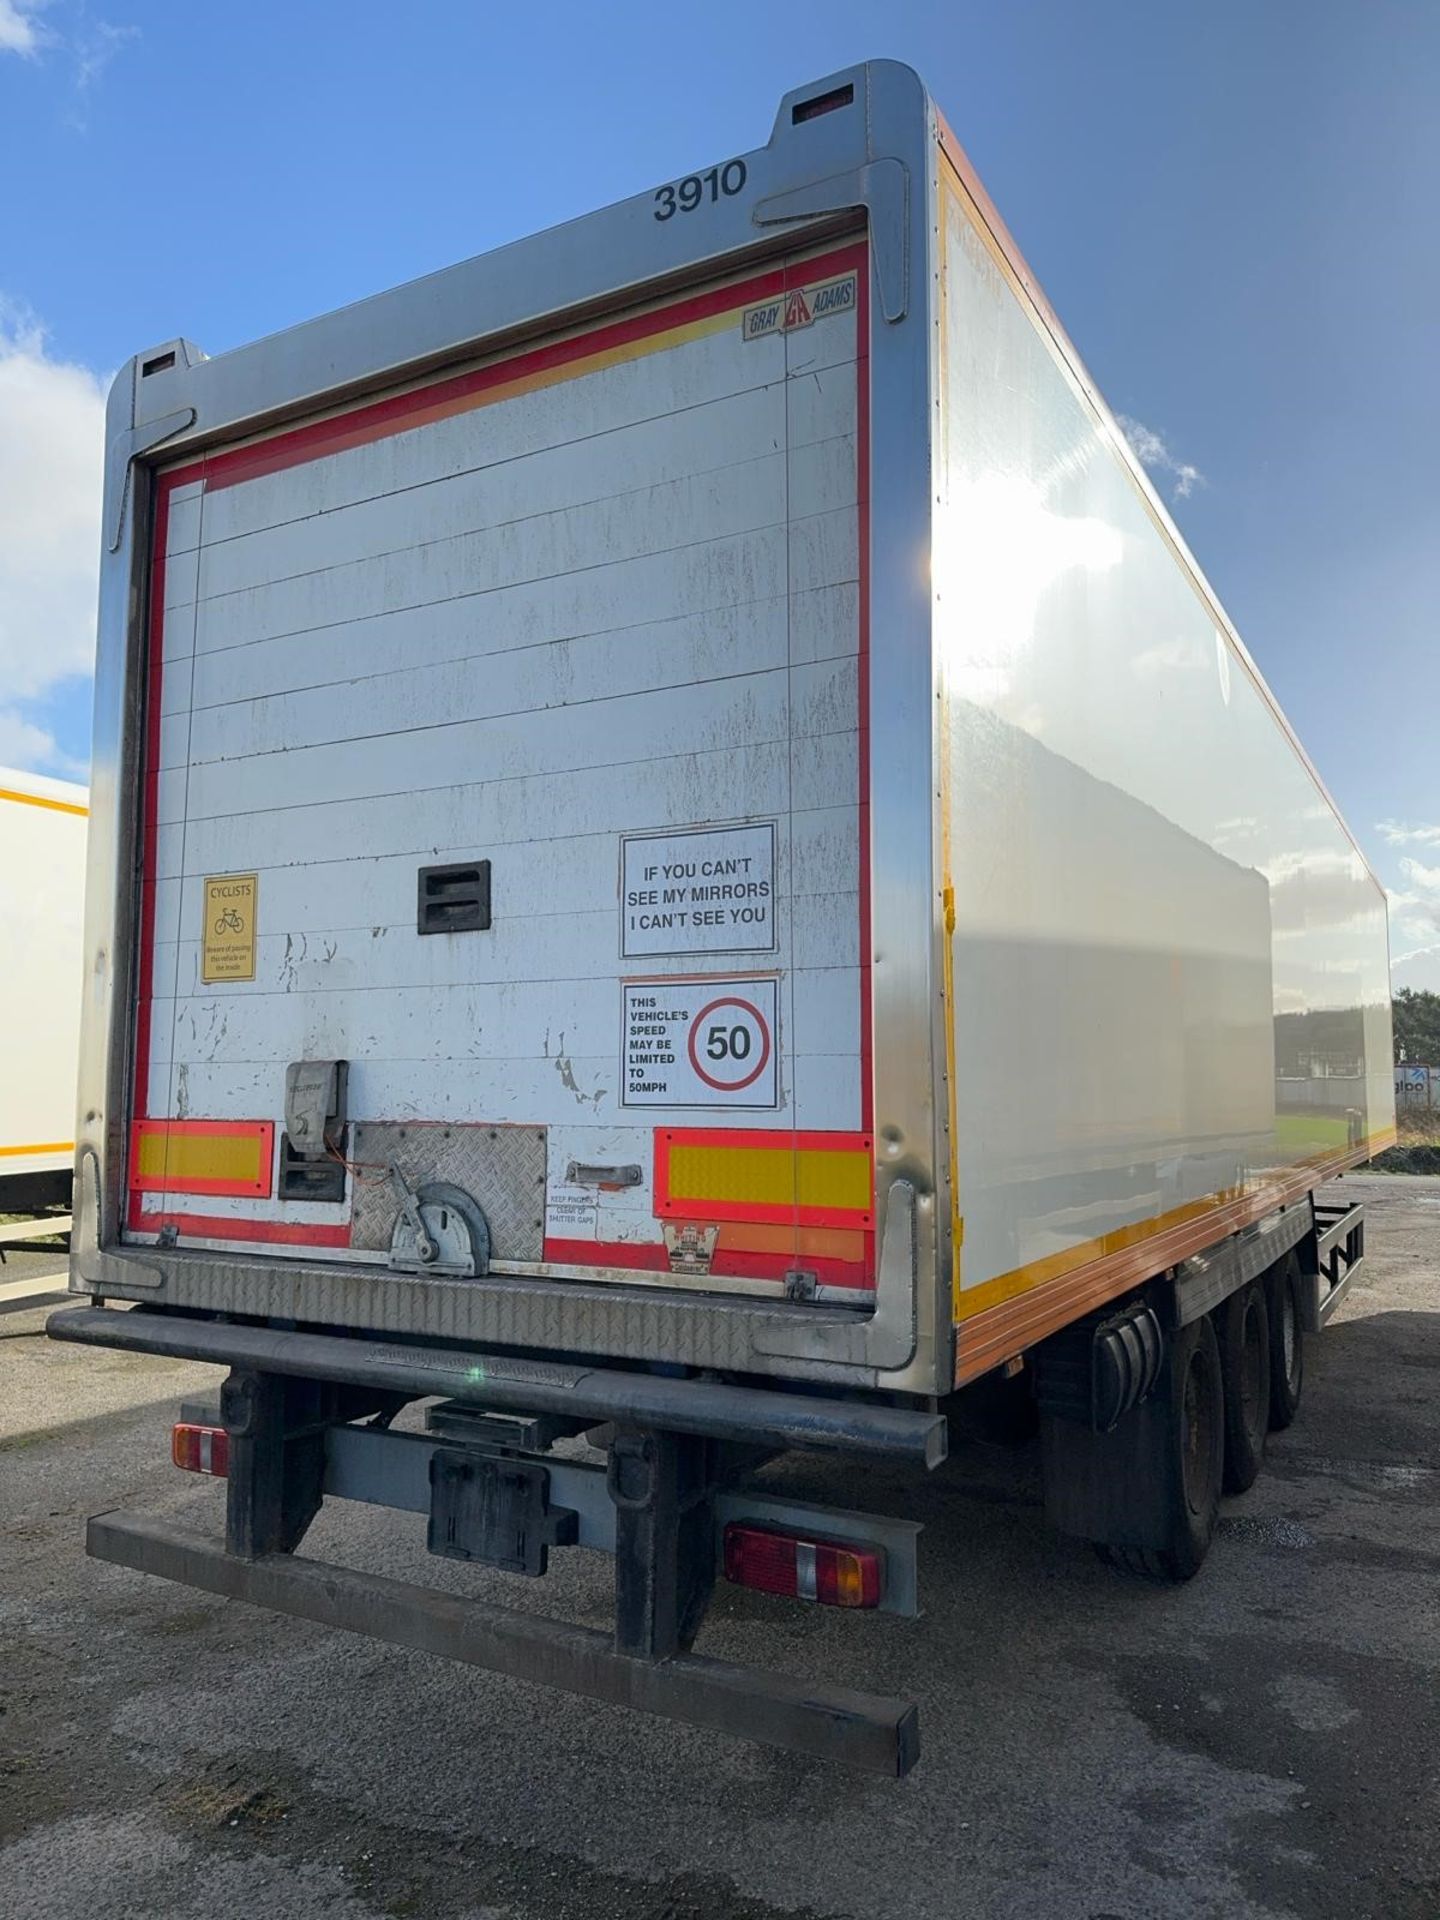 2010 Montracon 13.6 Refrigerated Multi-Temp Trailer - Image 12 of 13